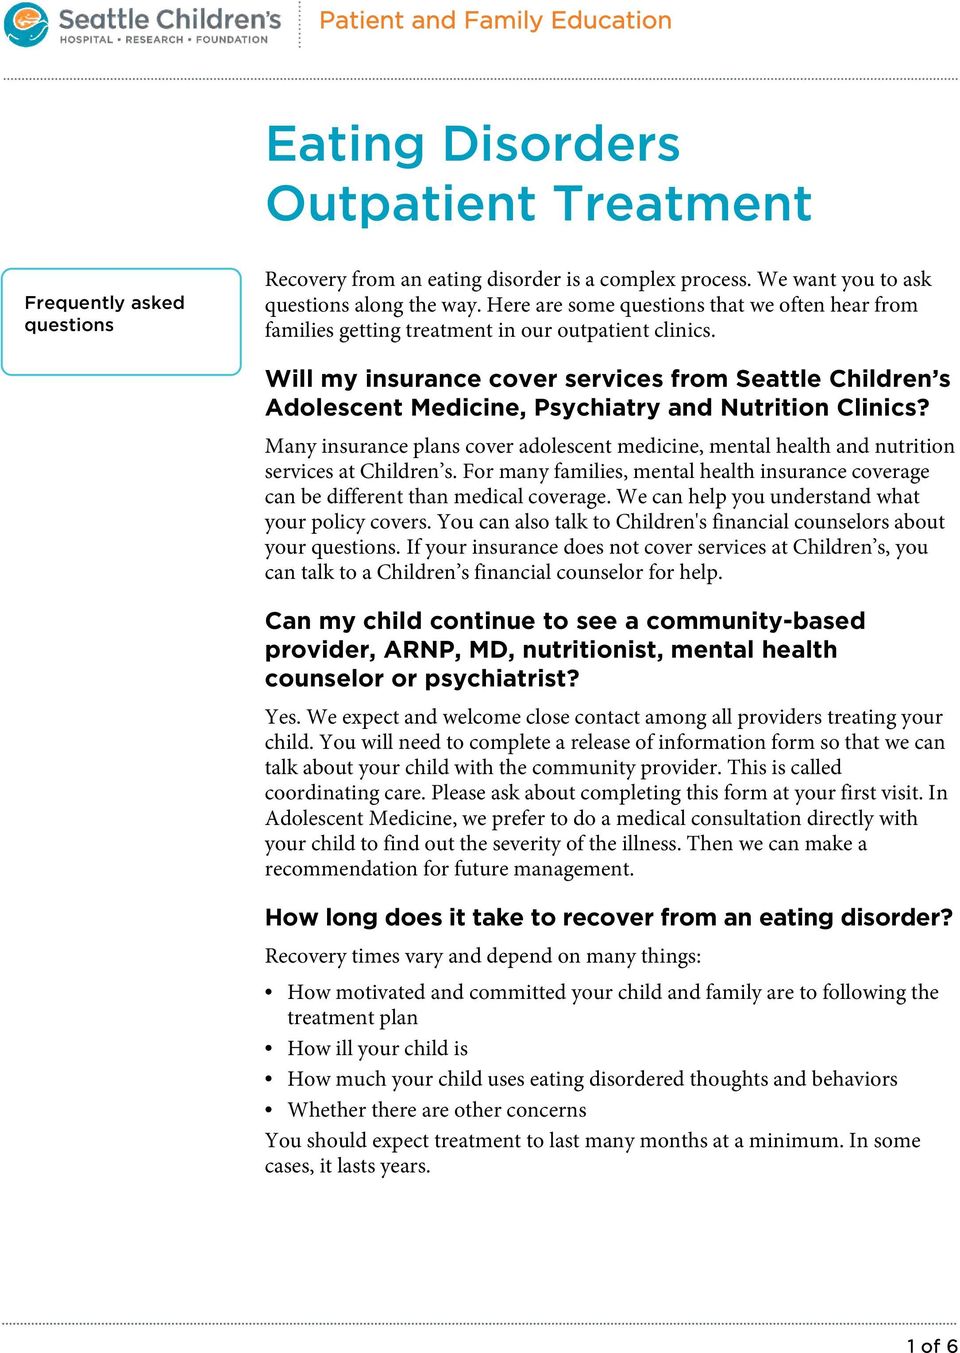 Will my insurance cover services from Seattle Children s Adolescent Medicine, Psychiatry and Nutrition Clinics?